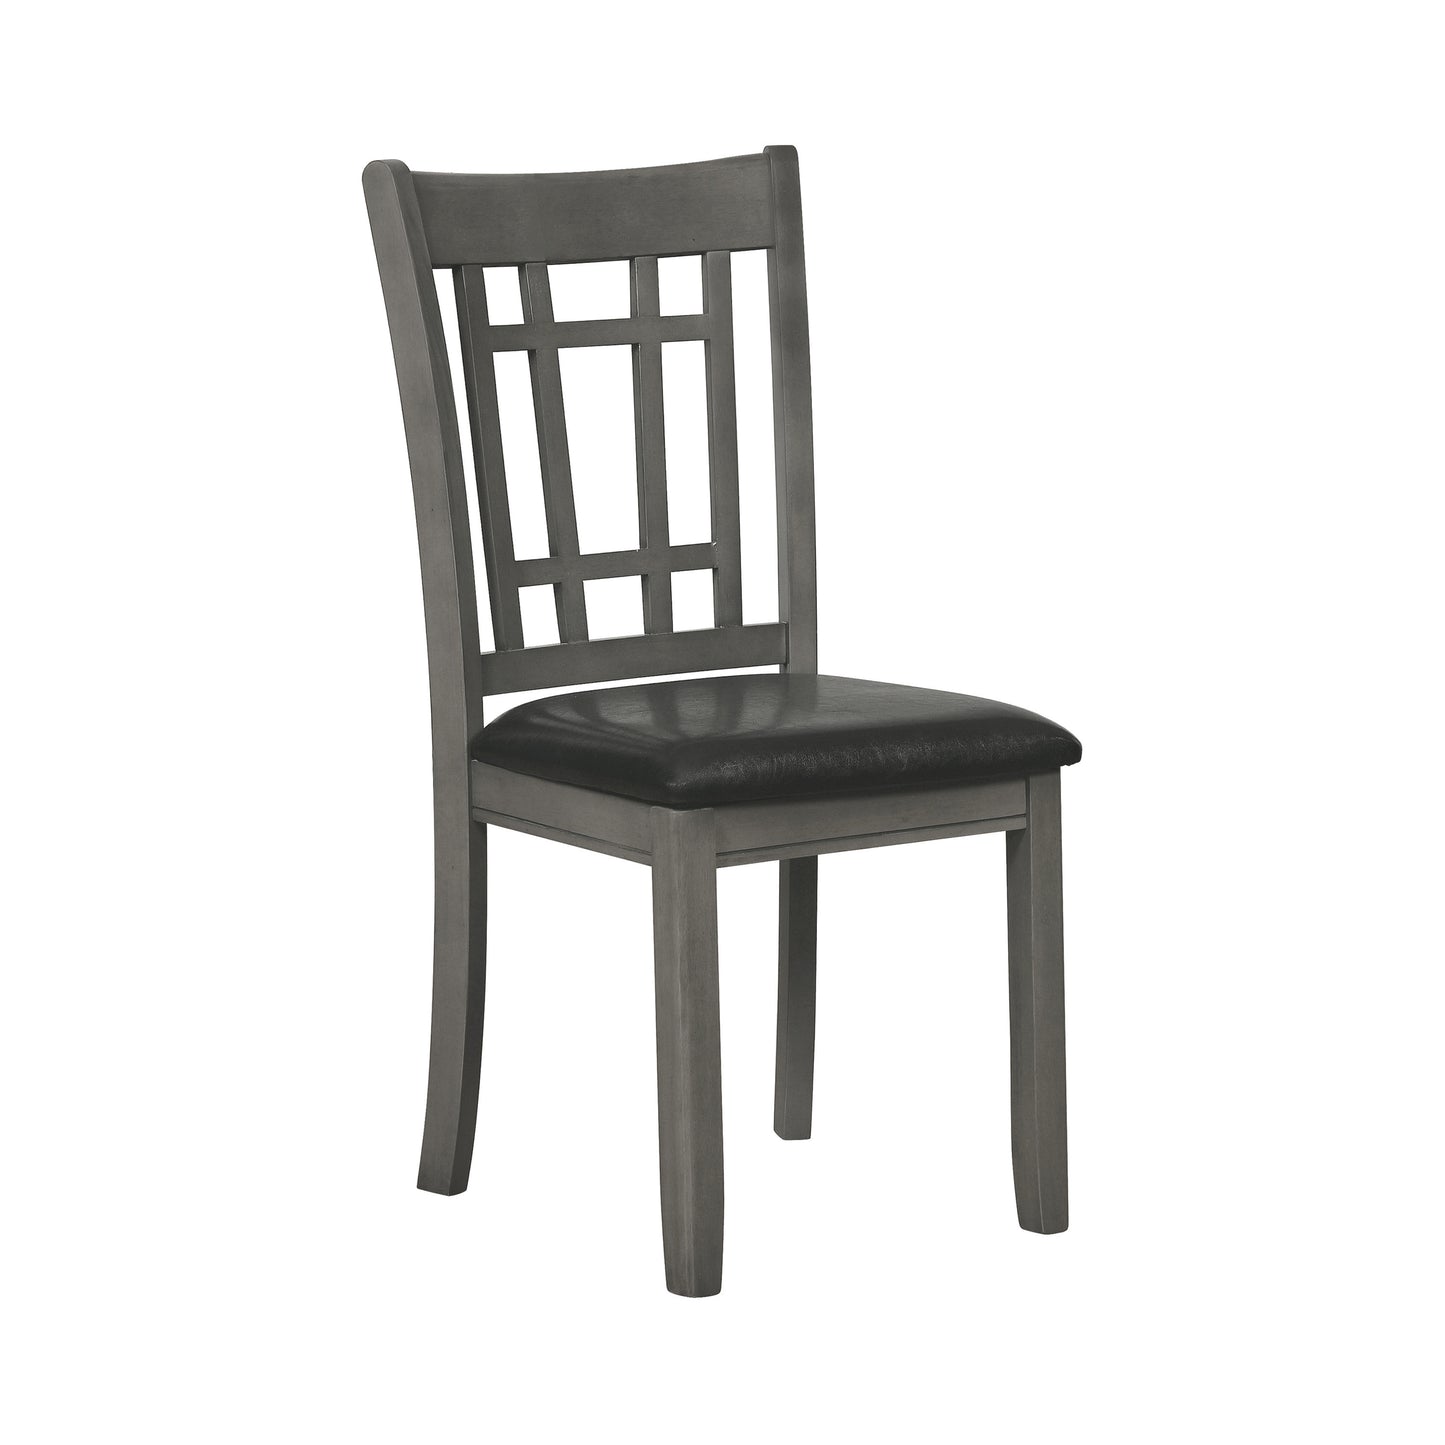 Lavon Padded Dining Side Chairs Espresso and Medium Grey (Set of 2)